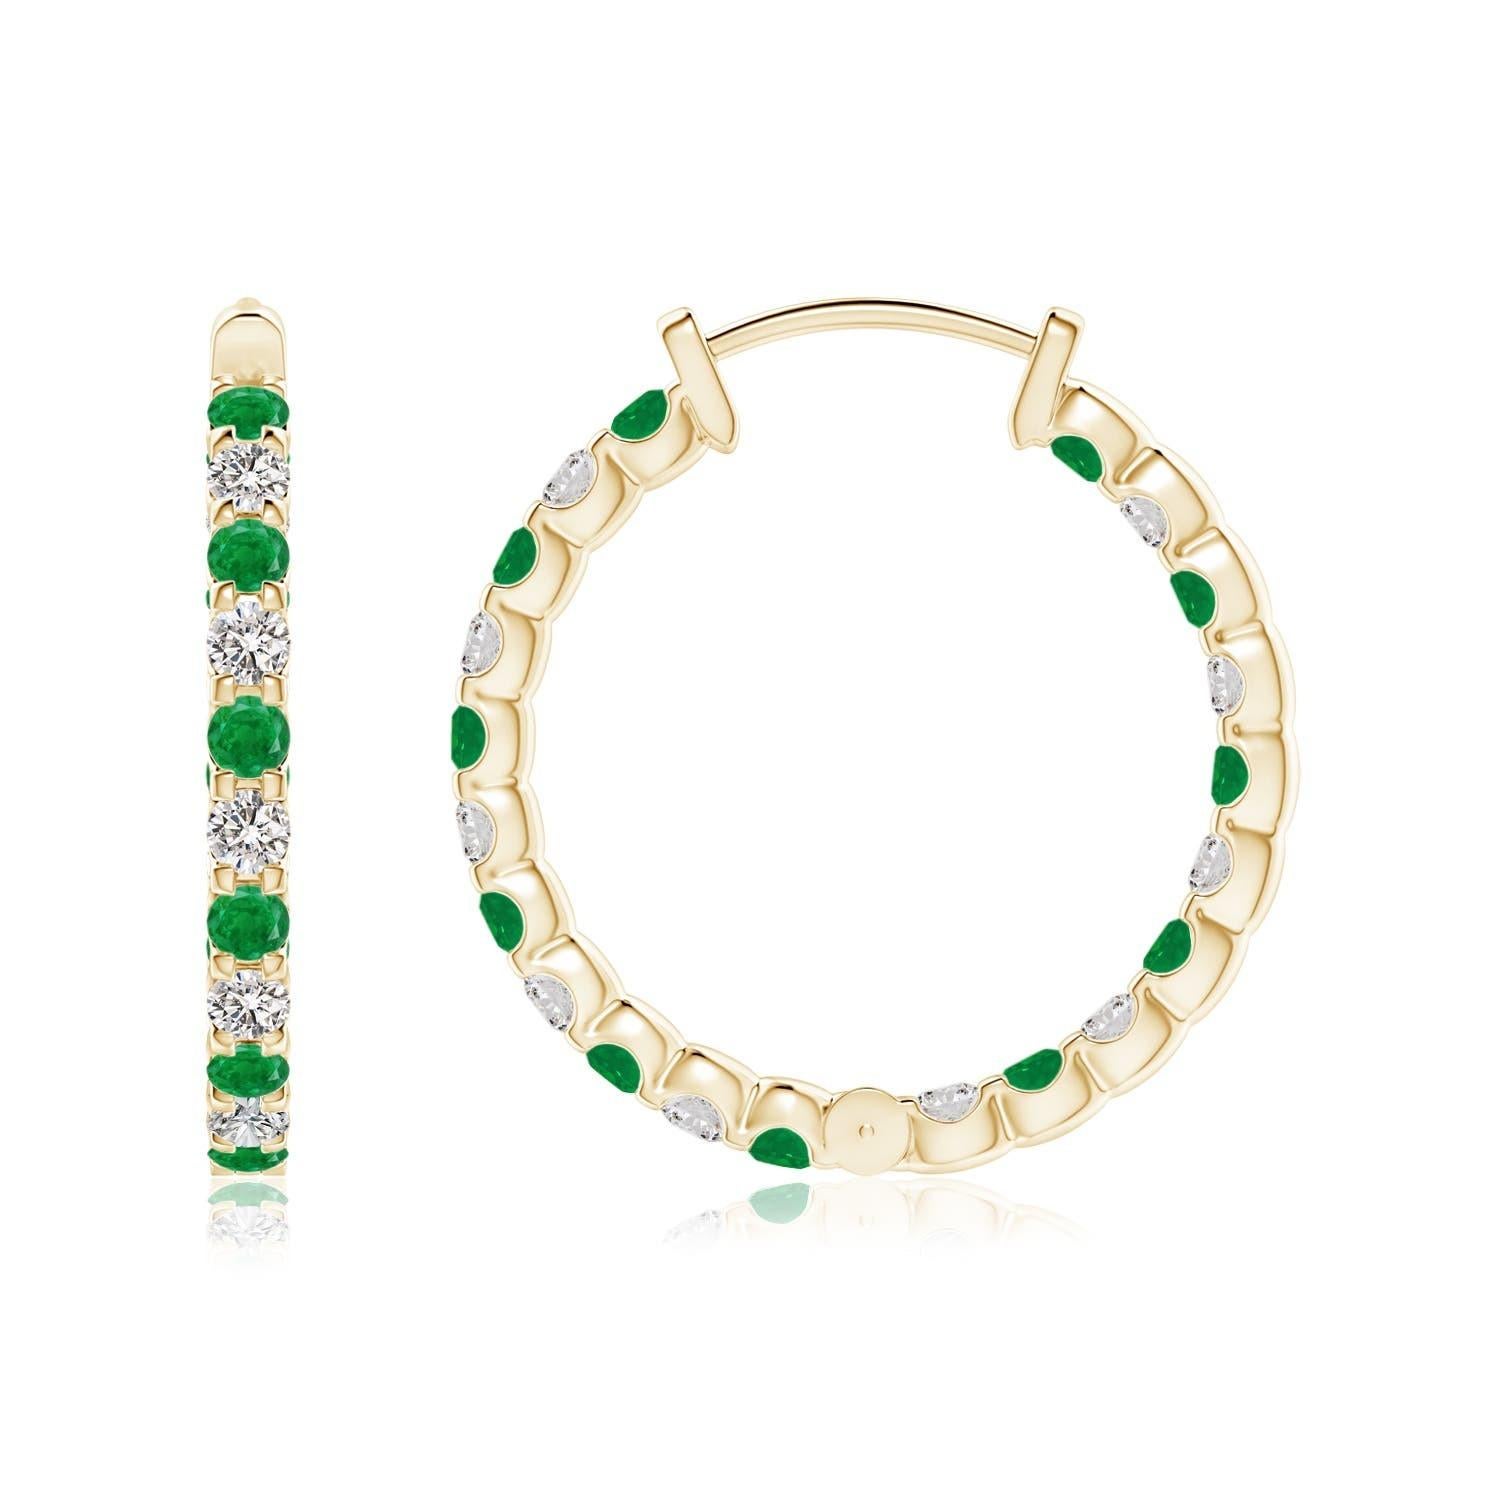 Alternately secured in prong settings are lush green emeralds and brilliant diamonds on these stunning hoop earrings. The scintillating gems are embellished on the outside as well as the inside of these 14k yellow gold hoops, showcasing a striking